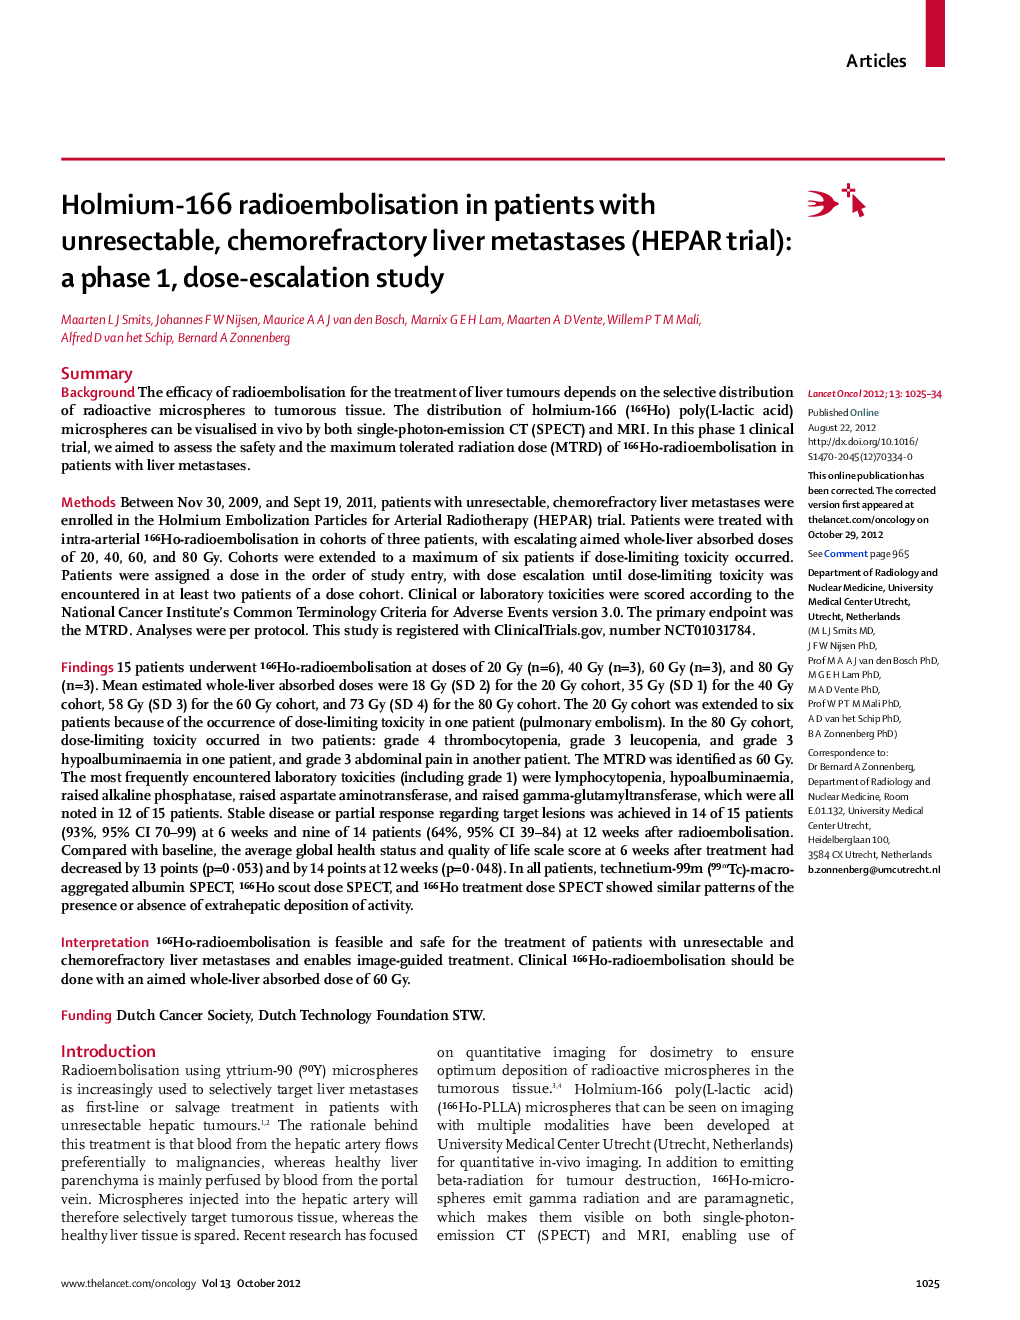 Holmium-166 radioembolisation in patients with unresectable, chemorefractory liver metastases (HEPAR trial): a phase 1, dose-escalation study